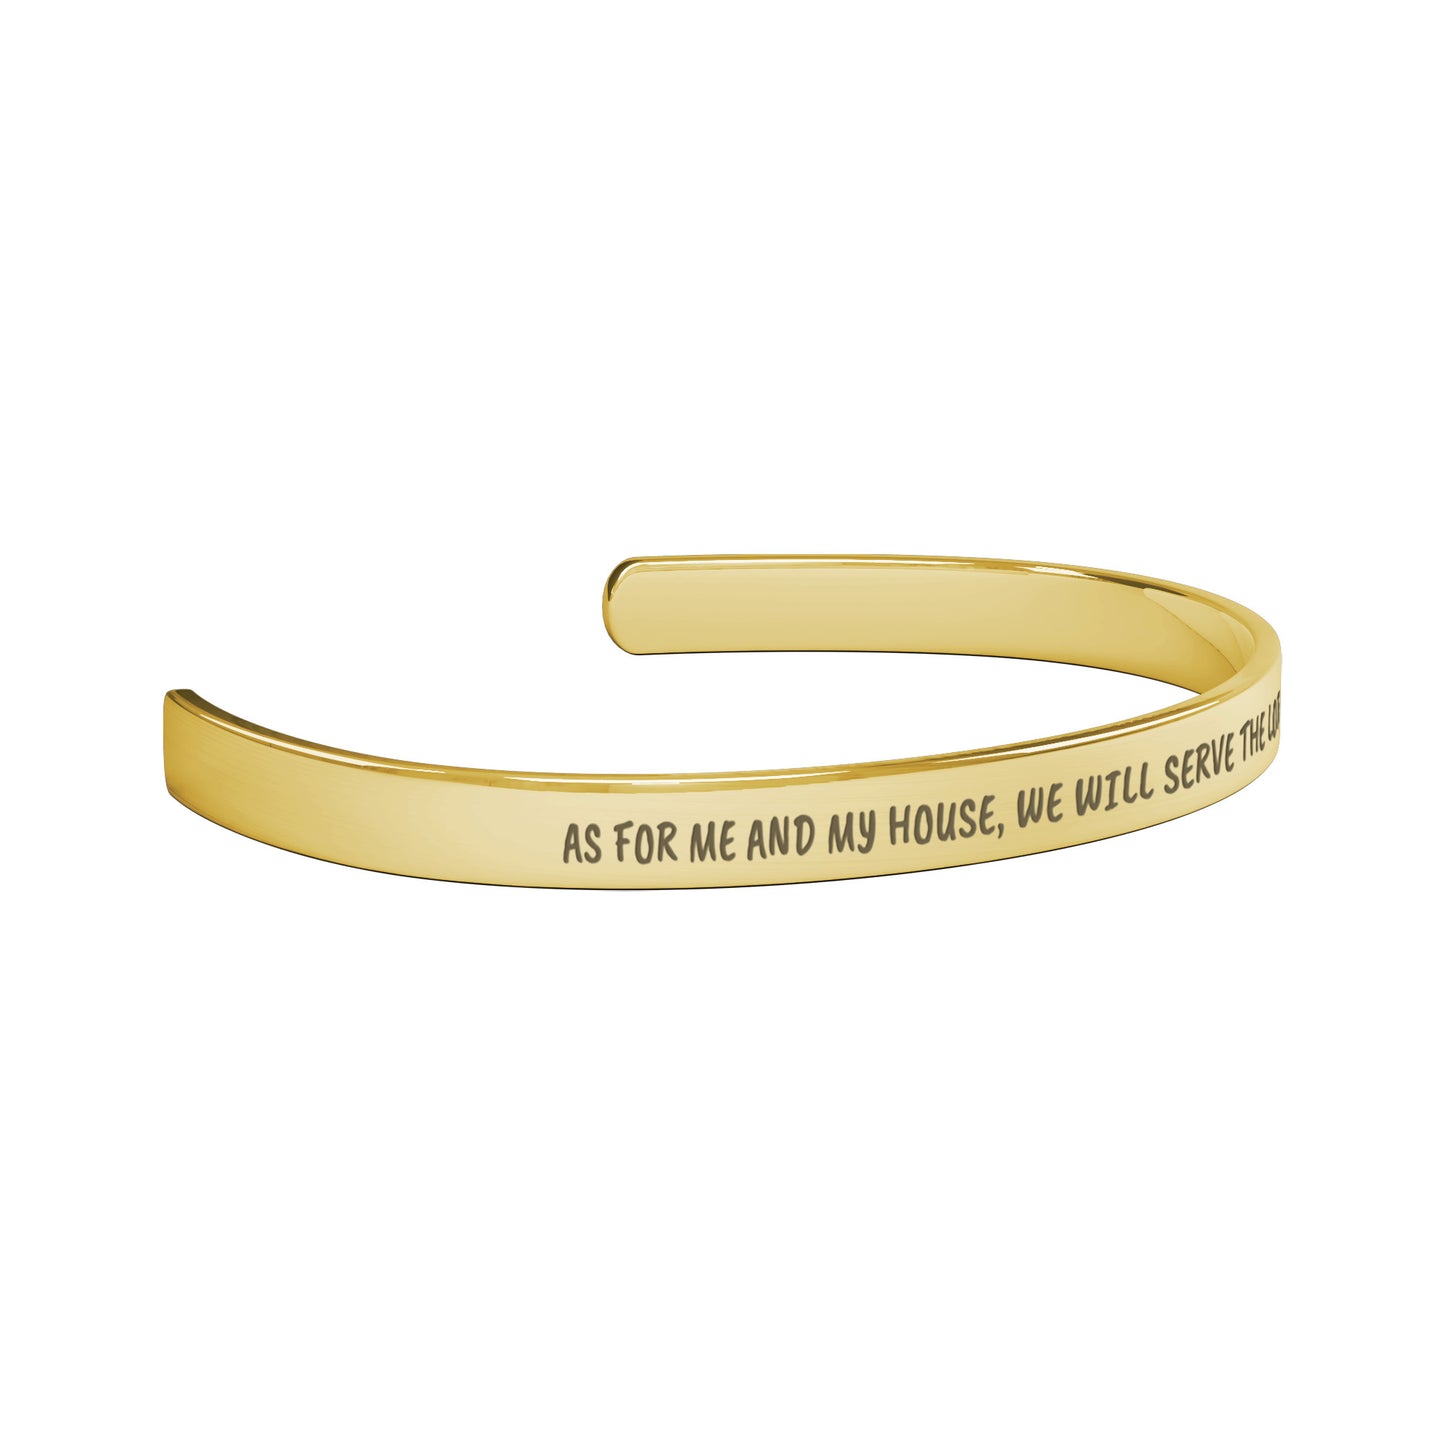 As For Me And My House, We Will Serve The Lord - Joshua 24:15 Cuff Bracelet